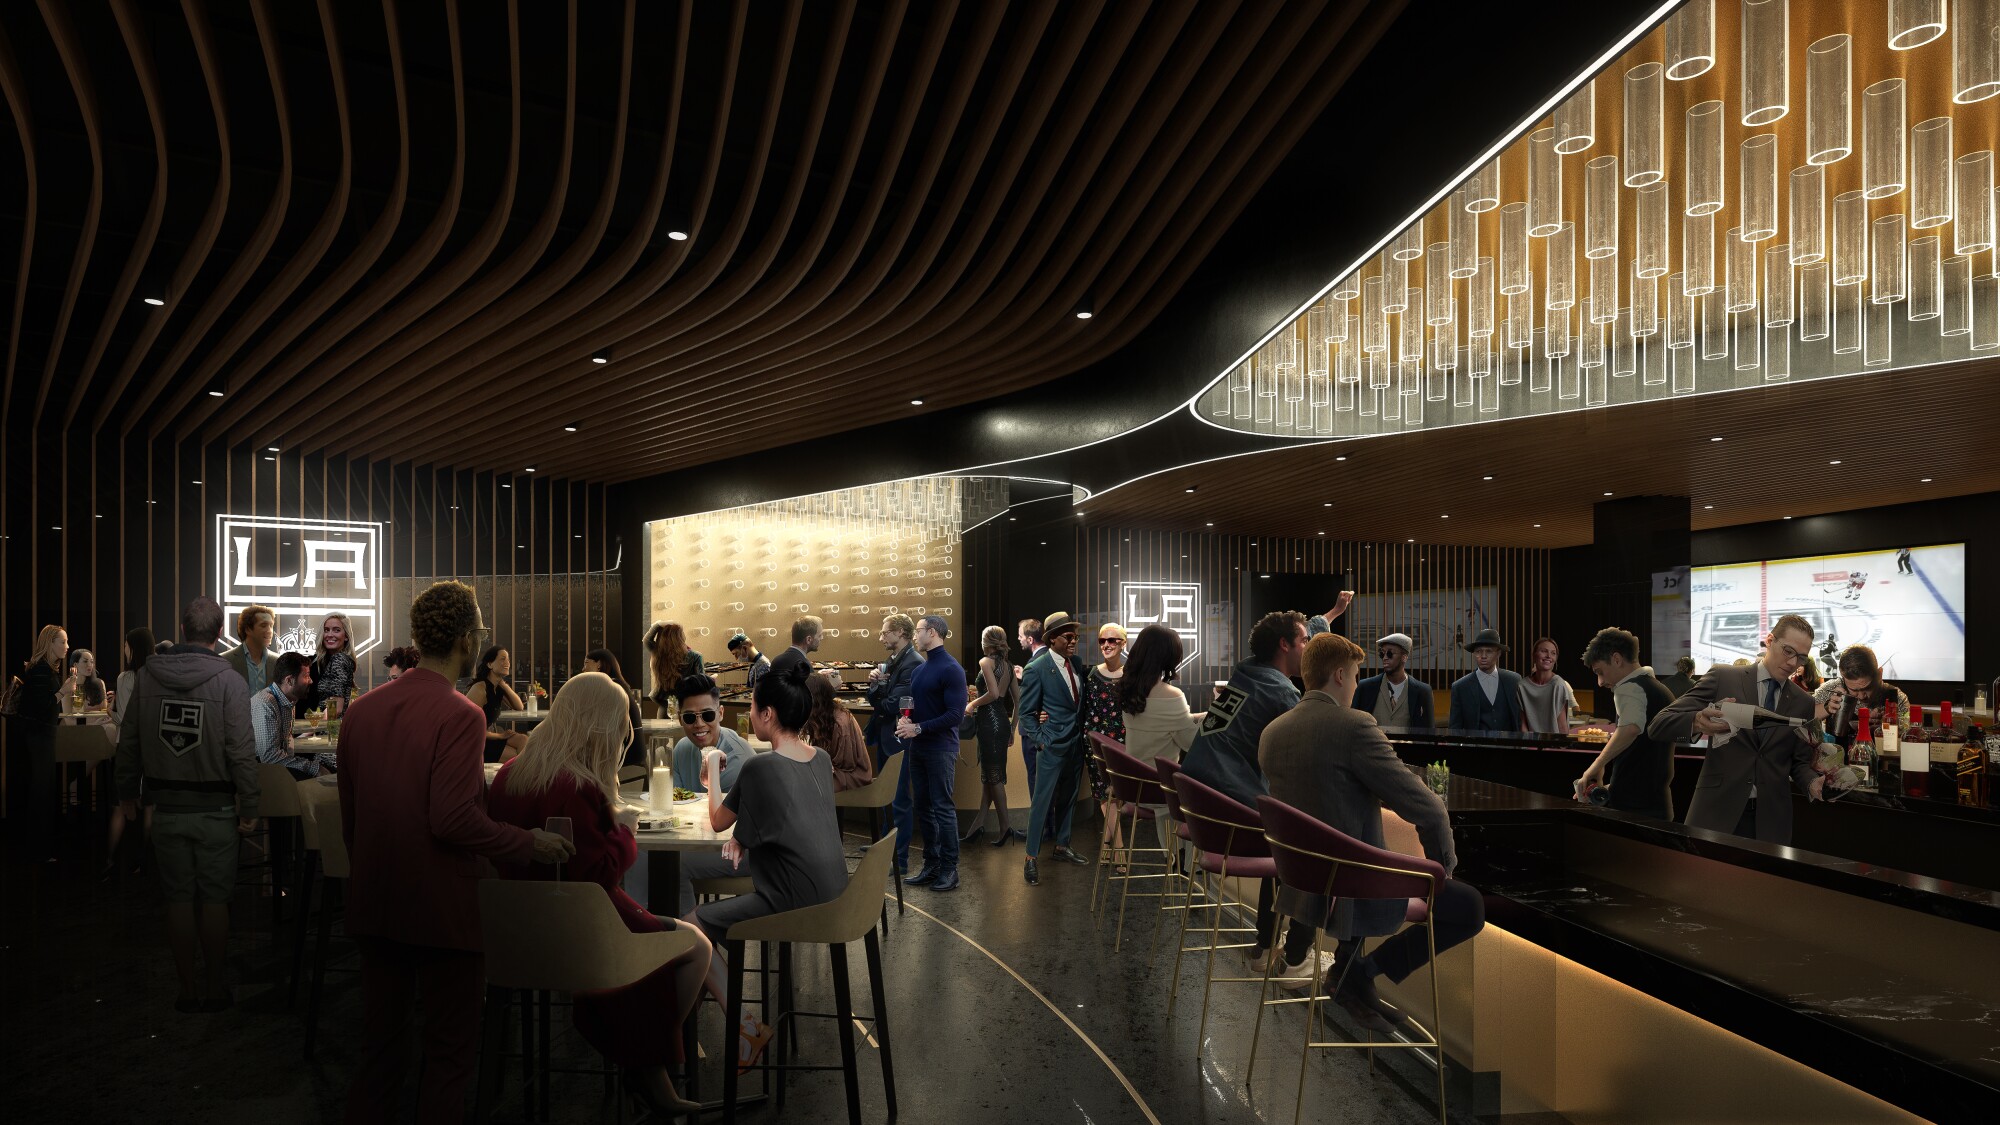 An artist's rendering of the Chairman's Club at the Crypto.com Arena